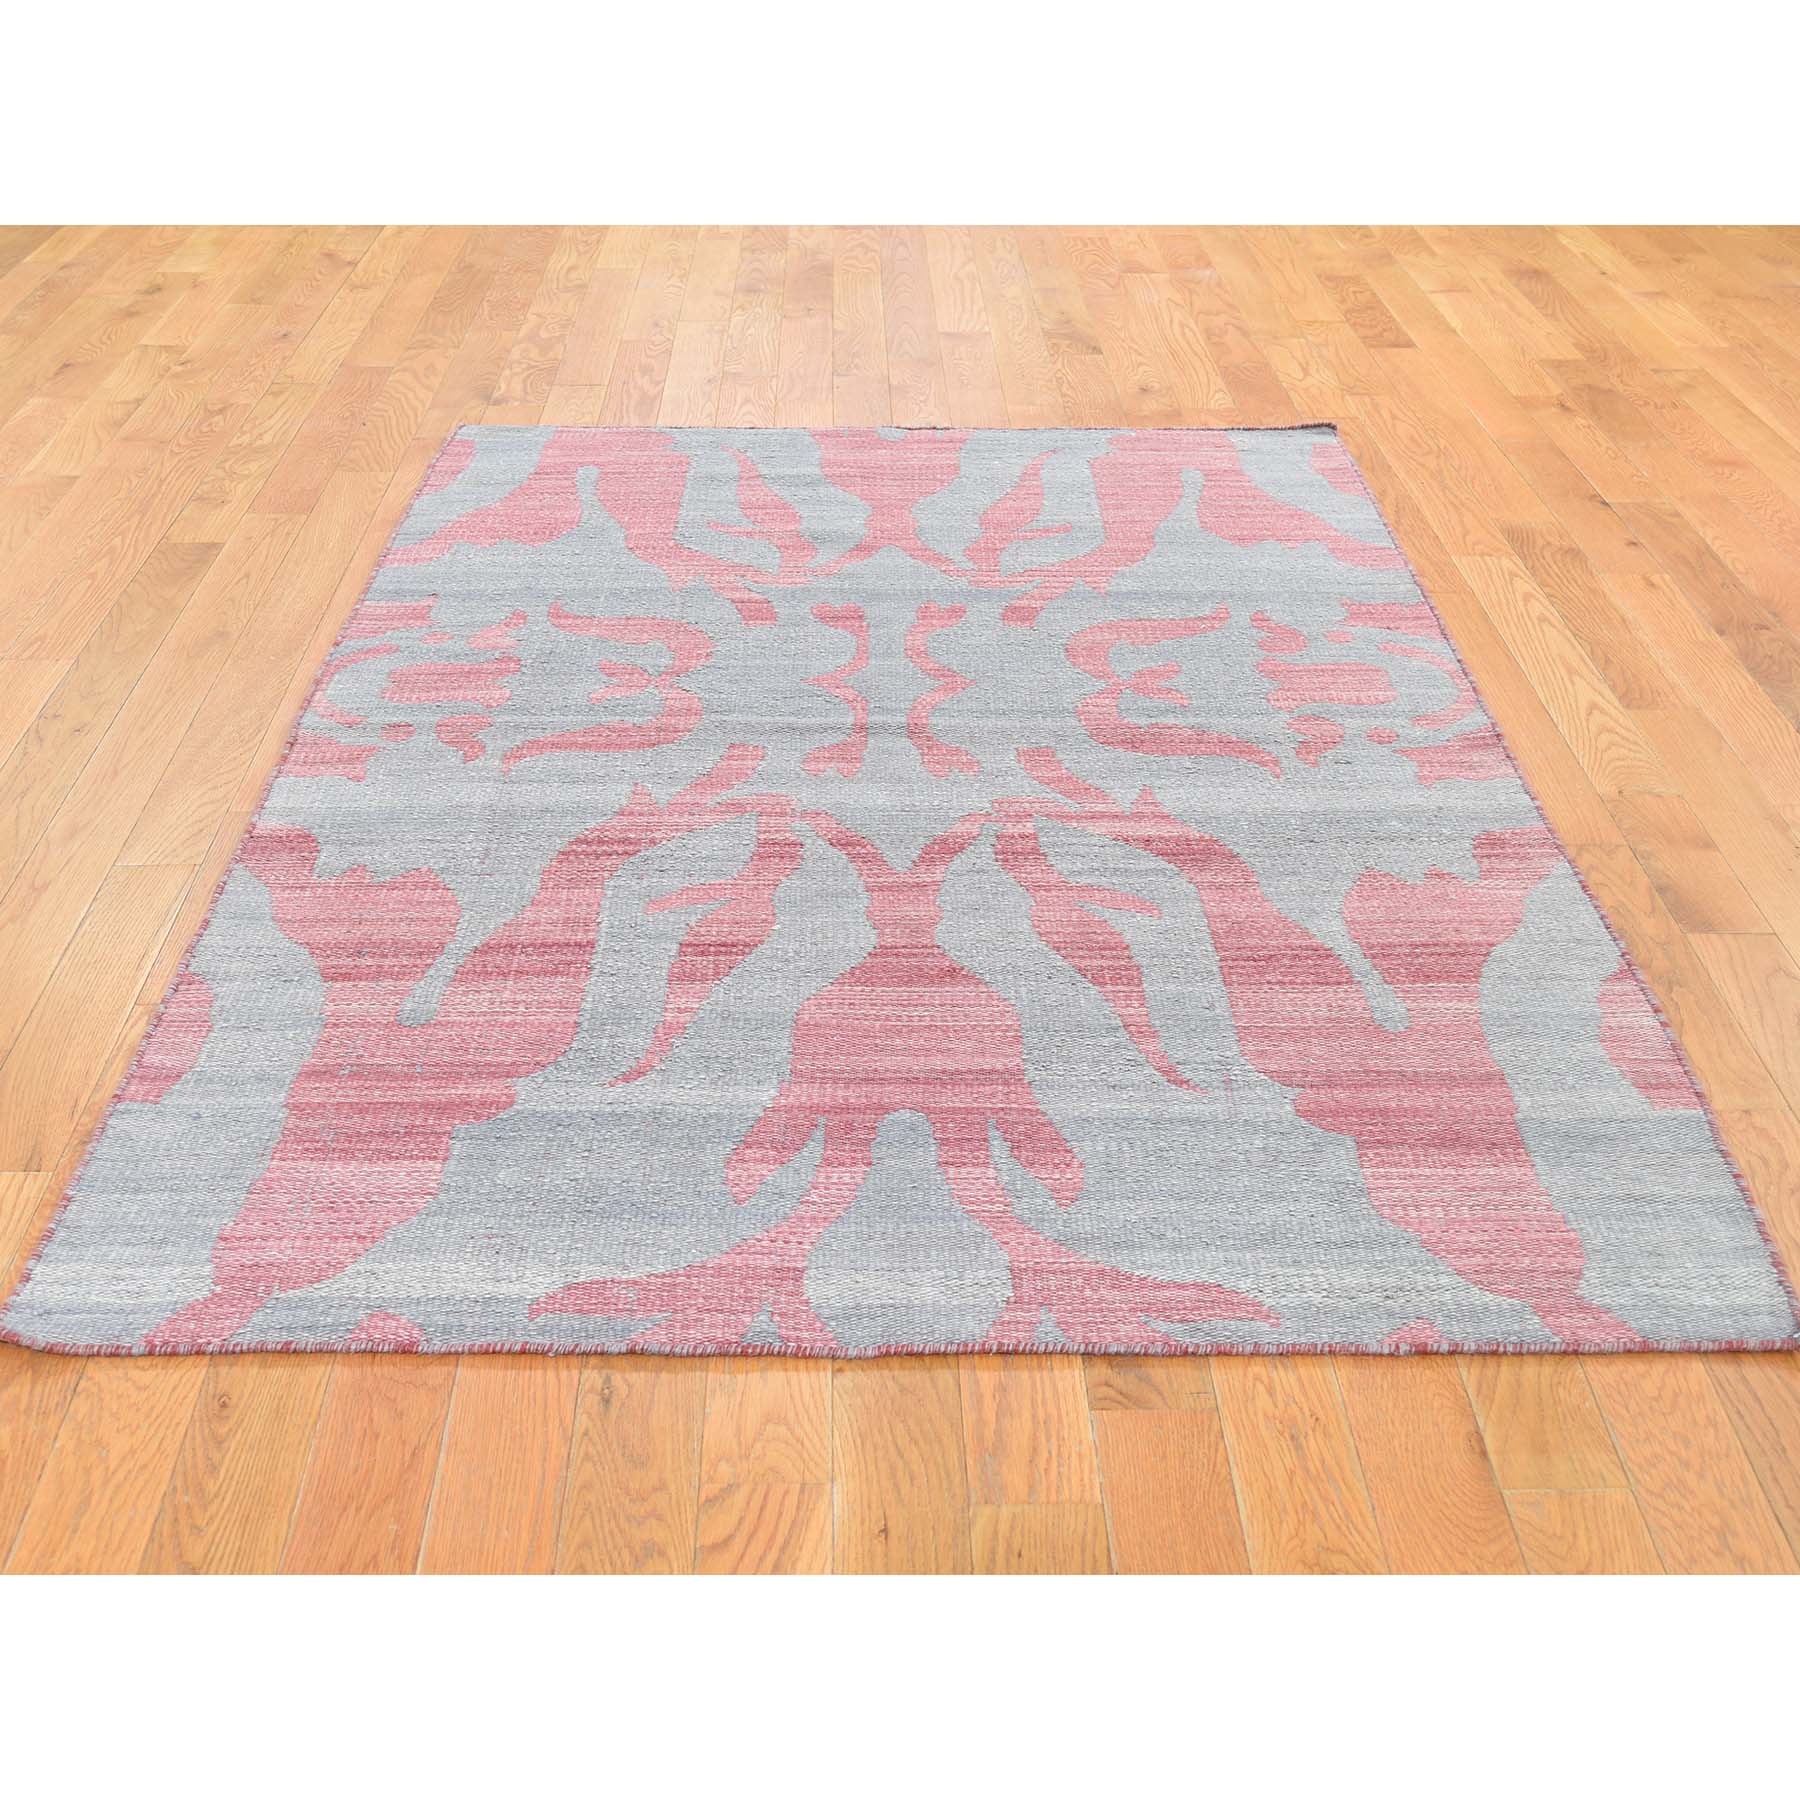 Traditional Wool Hand-Woven Area Rug 4'0